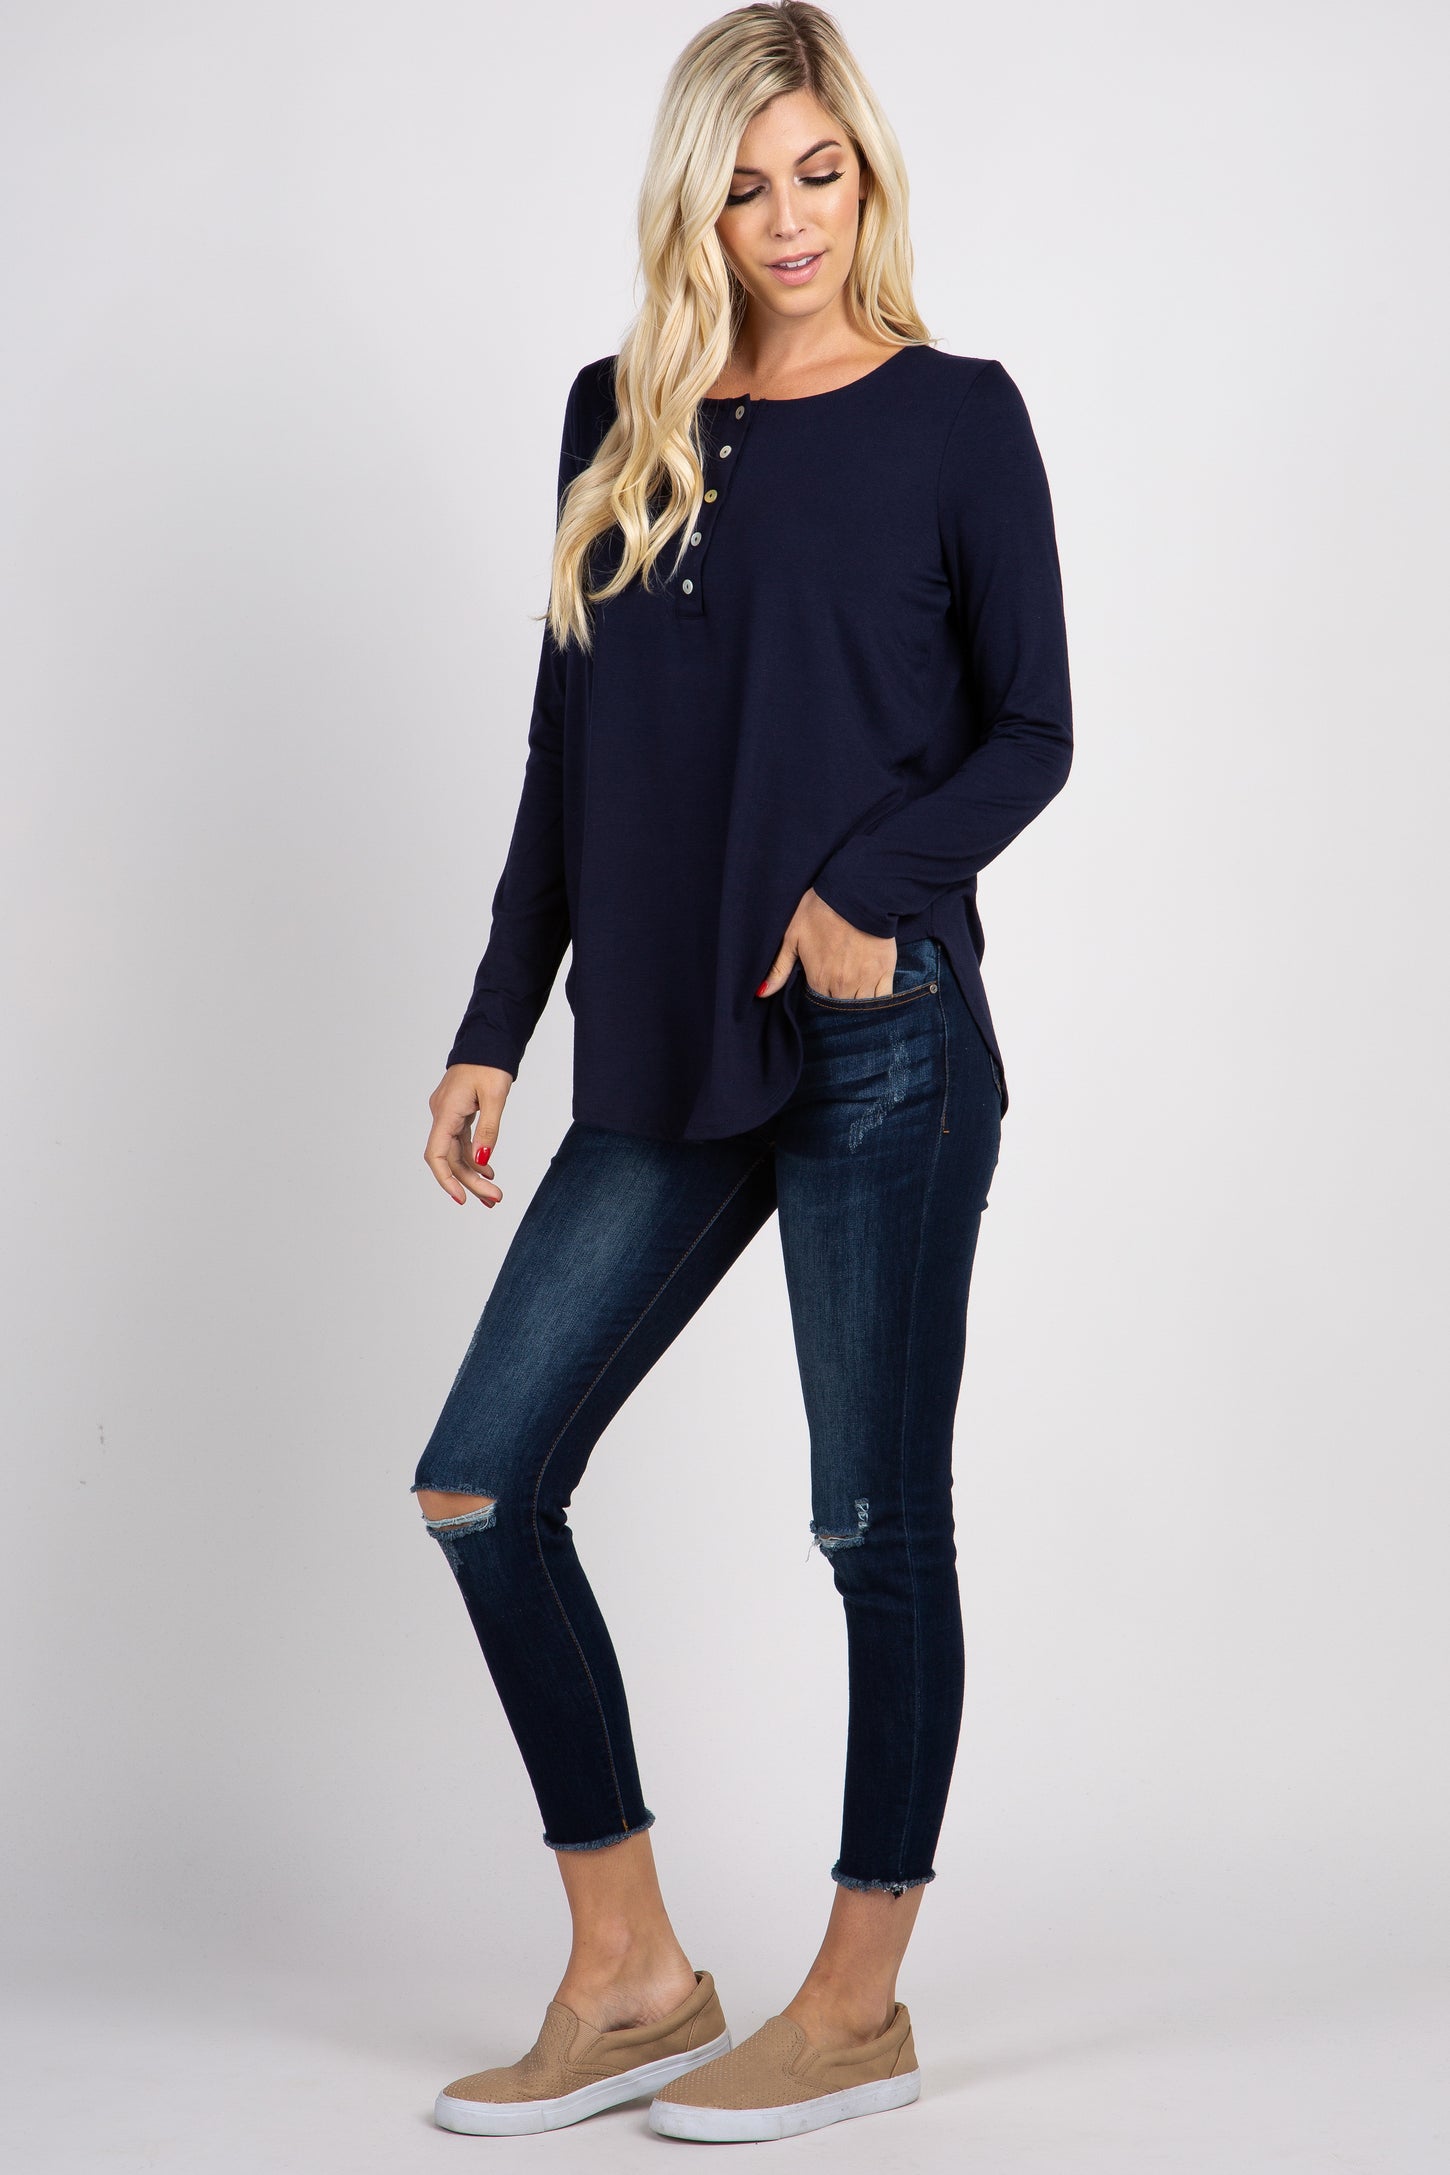 Navy Solid Button Accent Long Sleeve Top